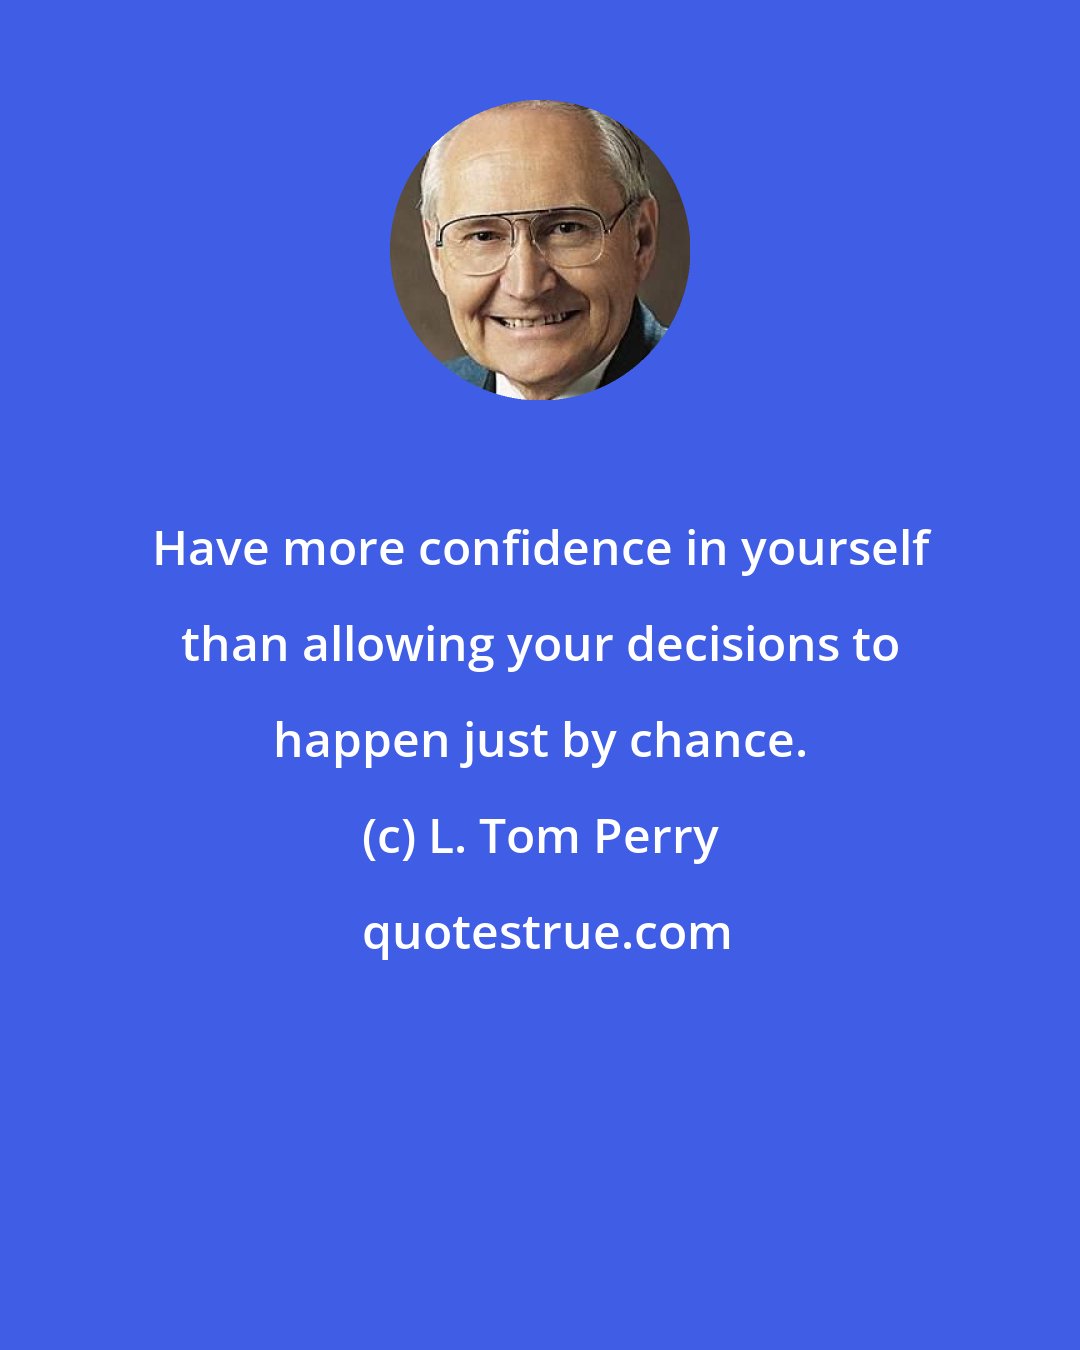 L. Tom Perry: Have more confidence in yourself than allowing your decisions to happen just by chance.